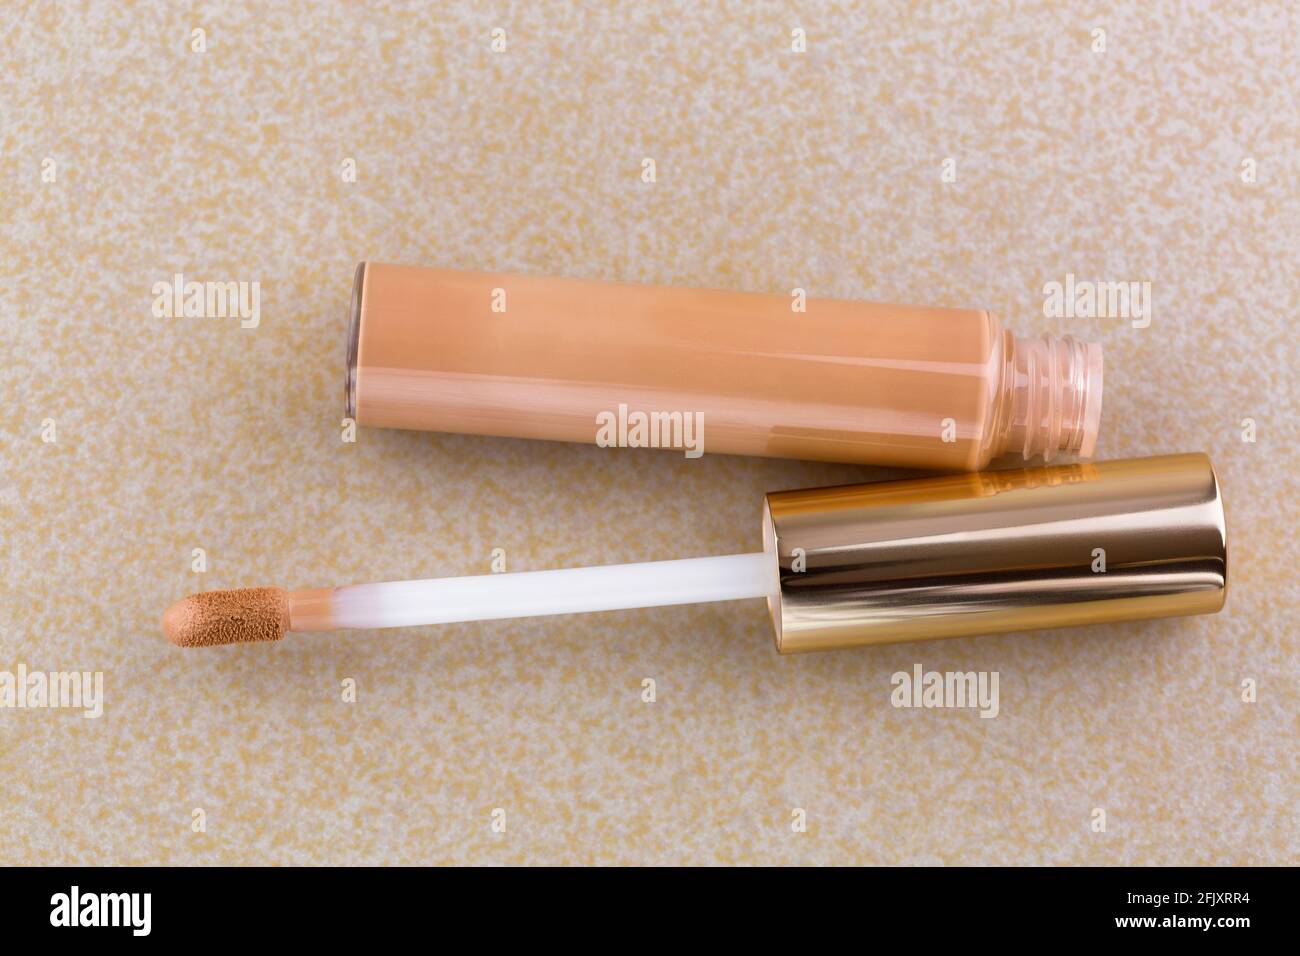 Tube of flawless wear creamy concealer with doe-foot applicator, high cover to conceal spots, blemishes, on yellow tile background Stock Photo